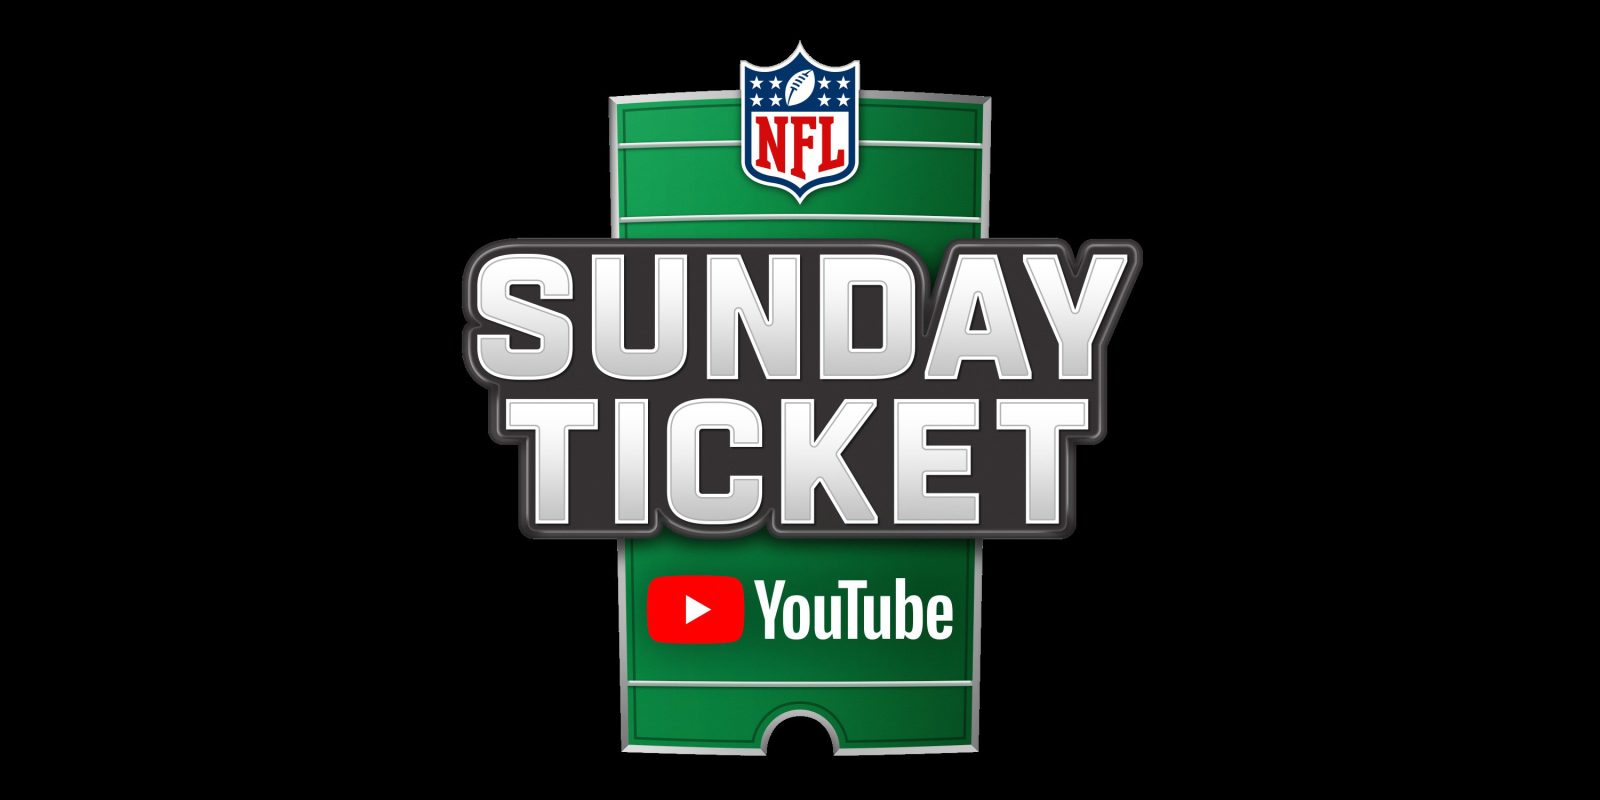 NFL Sunday Ticket on   will offer 'condensed' replays